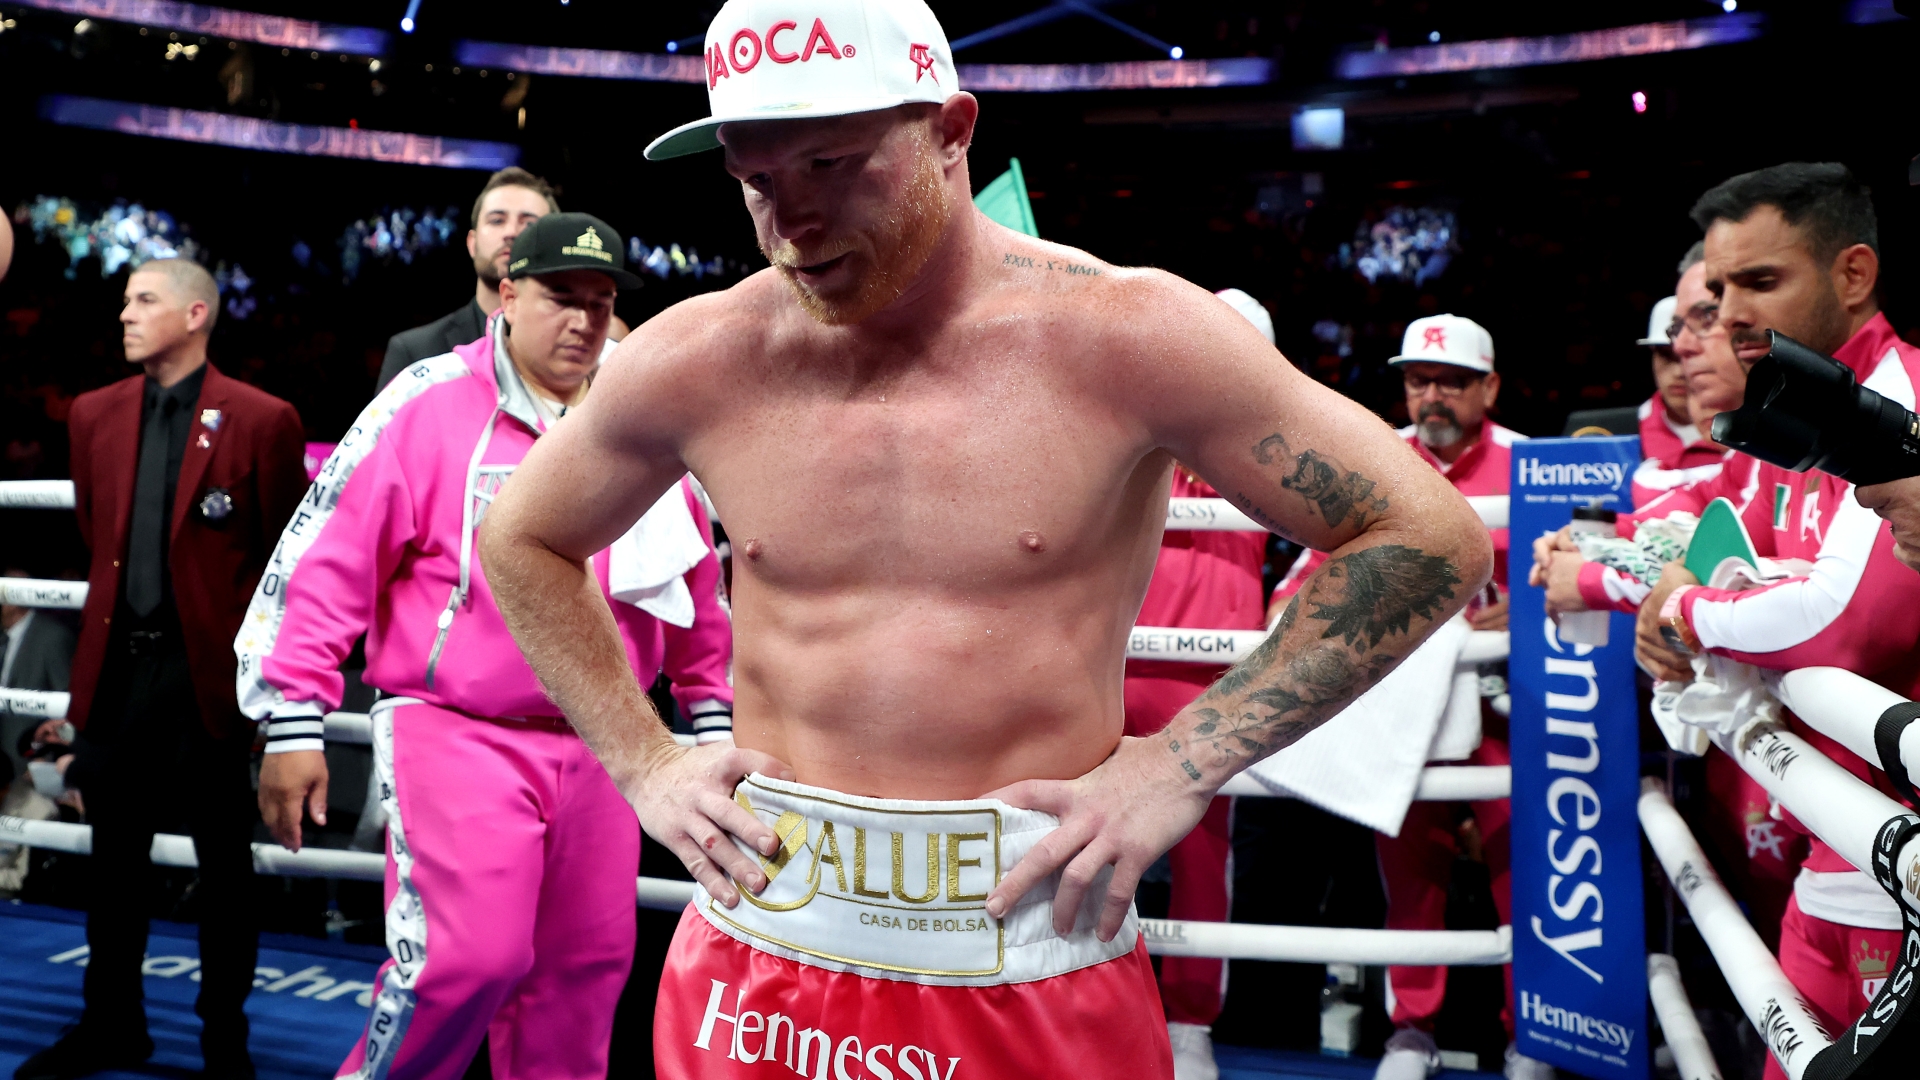 Canelo Alvarez admits he ‘couldn’t train like usual’ before defeat to Dmitry Bivol but vows not to make excuses ahead of rematch with Gennady Golovkin